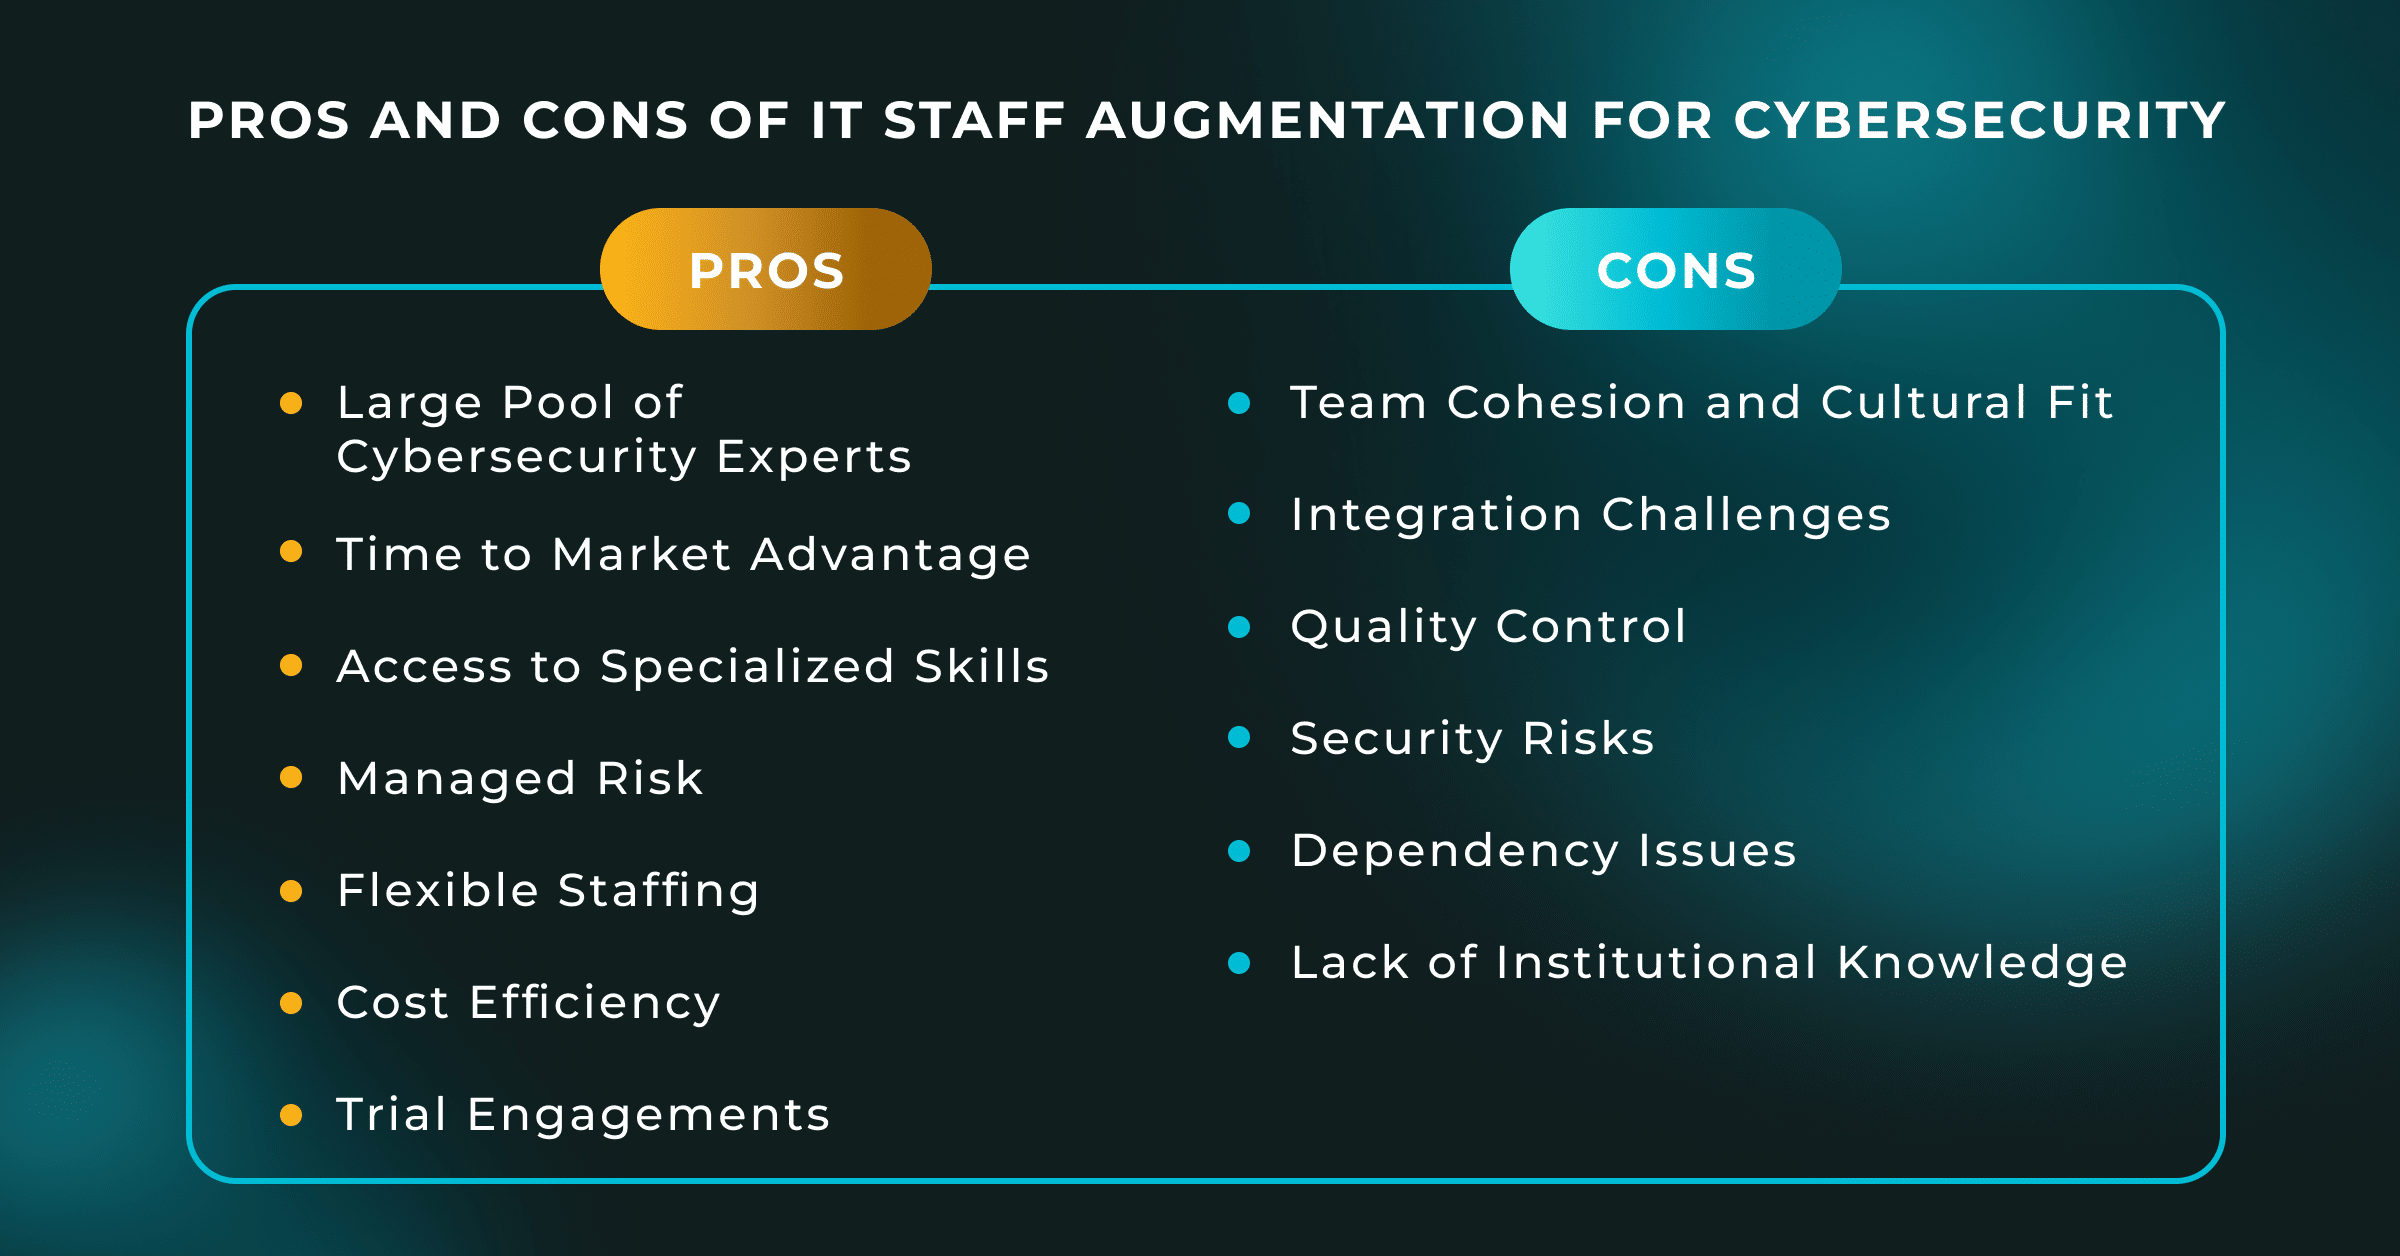 IT Staff Augmentation for Cybersecurity: Pros and Cons